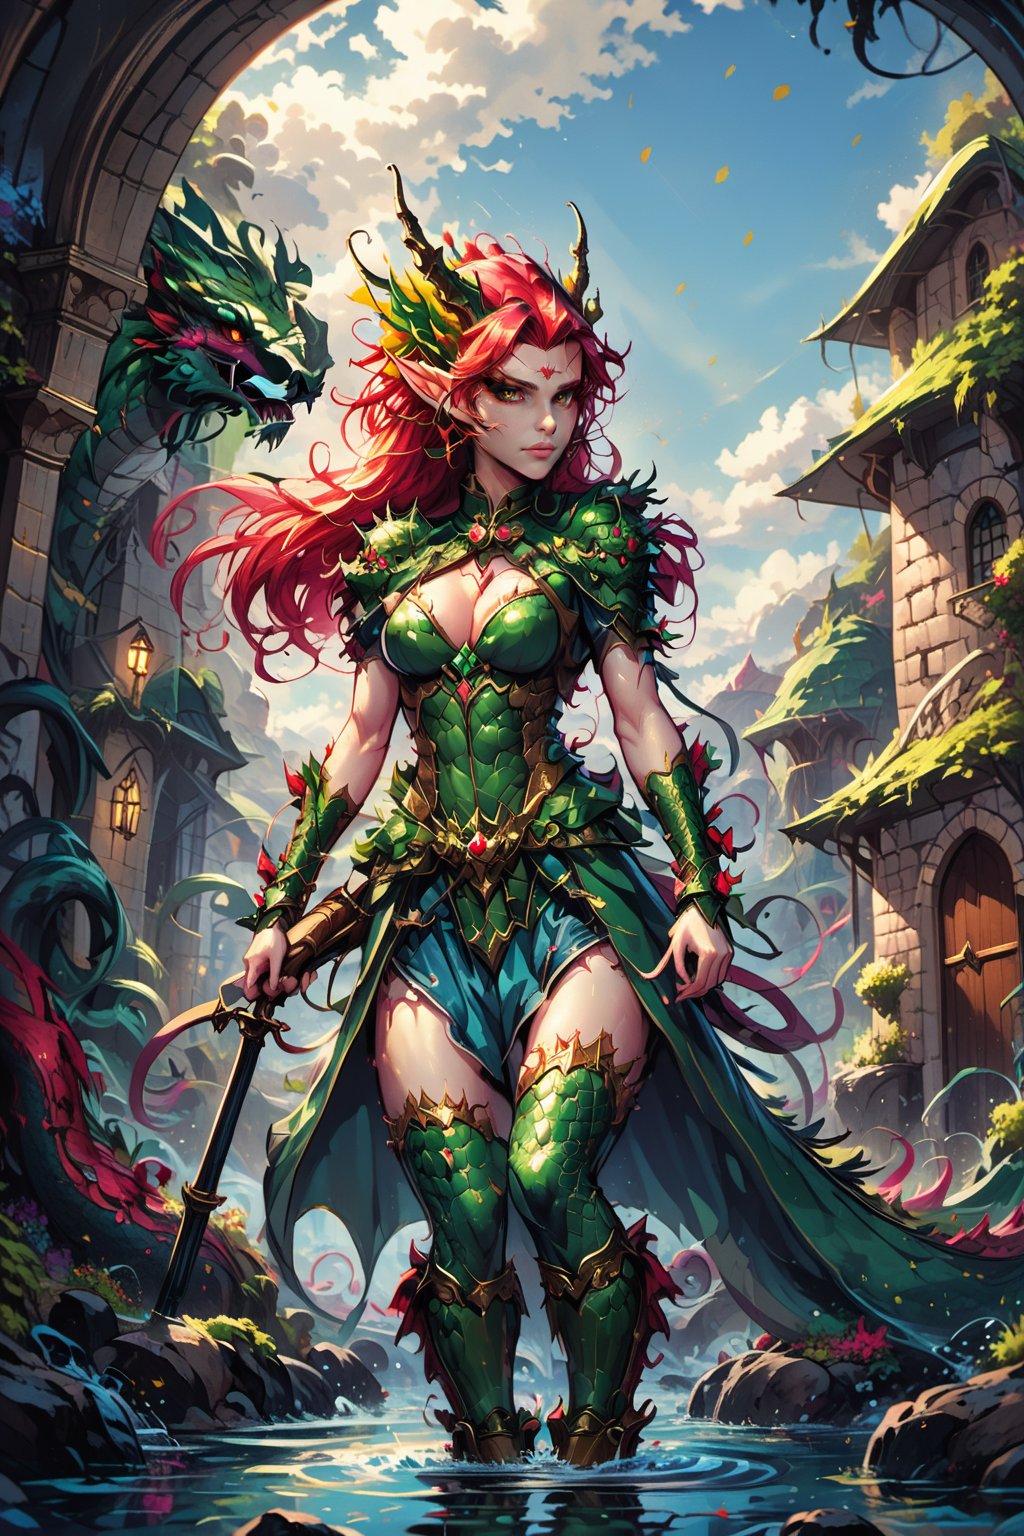 The pink tight-fitting leather outfit shows off a good female figure. The body is partially covered with green armor, revealing slender legs and yellow military boots. A European woman with medium-length red hair, holding a bow in her hand, and her ears are shaped like an elf;
A water-blue dragon sprang out from the building. There were water marks on the dragon's scales, and it felt like it had just emerged from the bottom of the water.